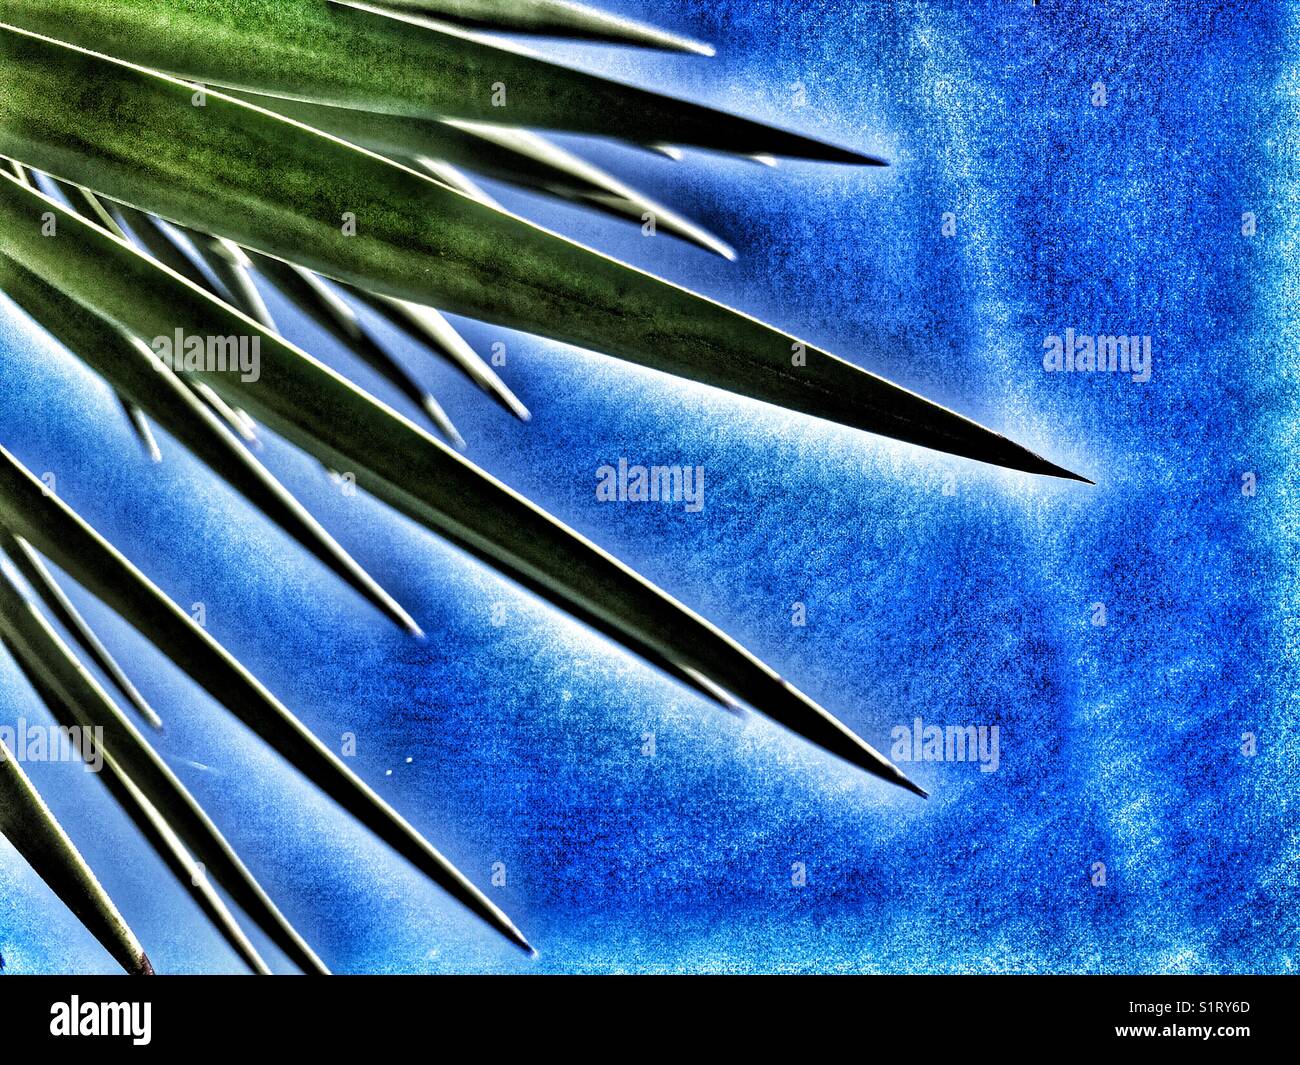 Sharp pointed leaves of Yucca gloriosa, also known as Spanish bayonet or Spanish dagger. Stock Photo